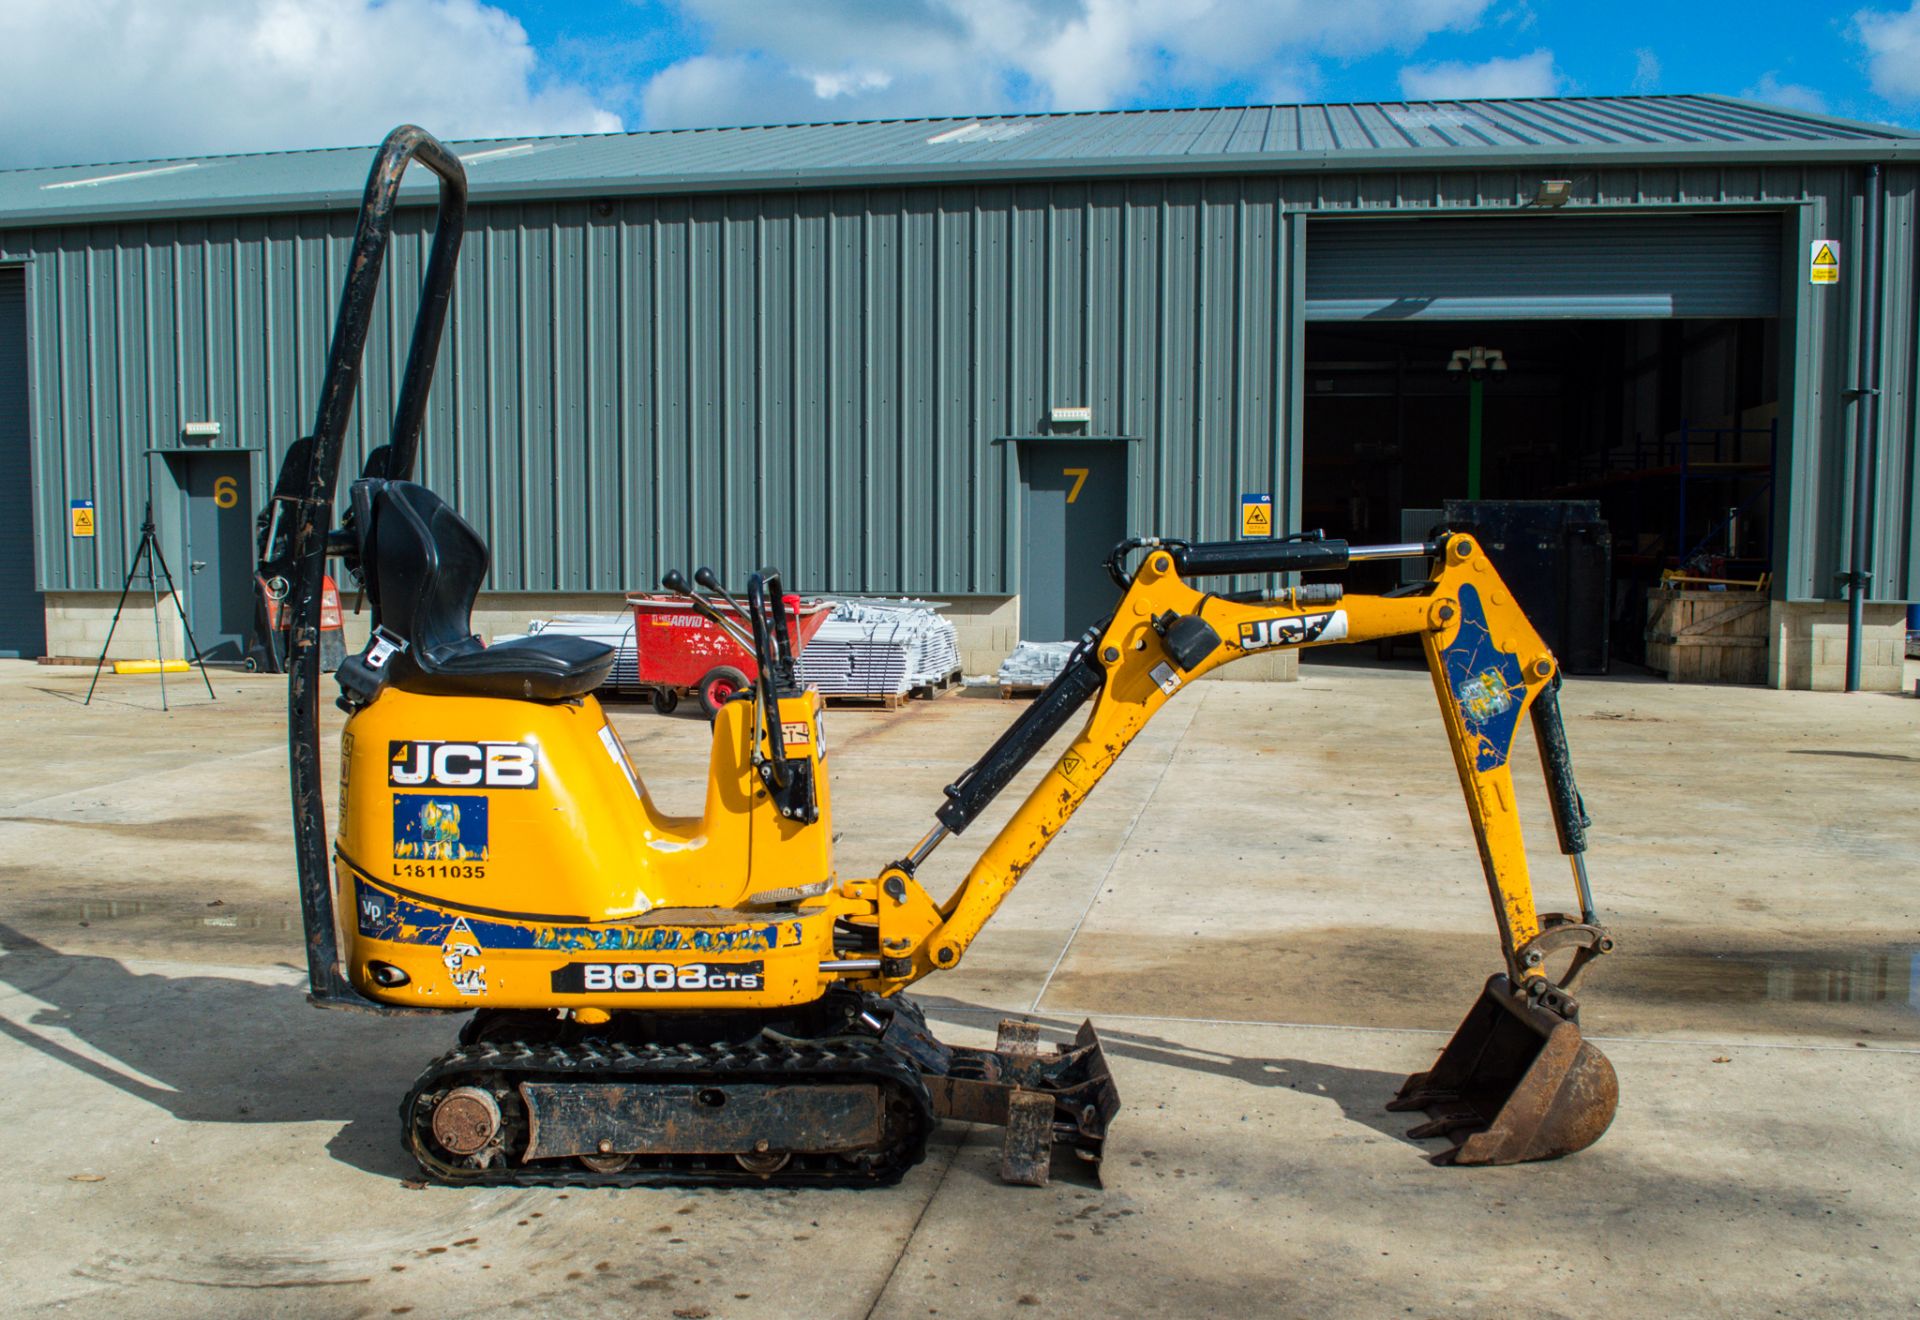 JCB 8008cts 0.8 tonne rubber tracked micro excavator Year: 2018 S/N: 749894 Recorded Hours: 980 - Image 8 of 19